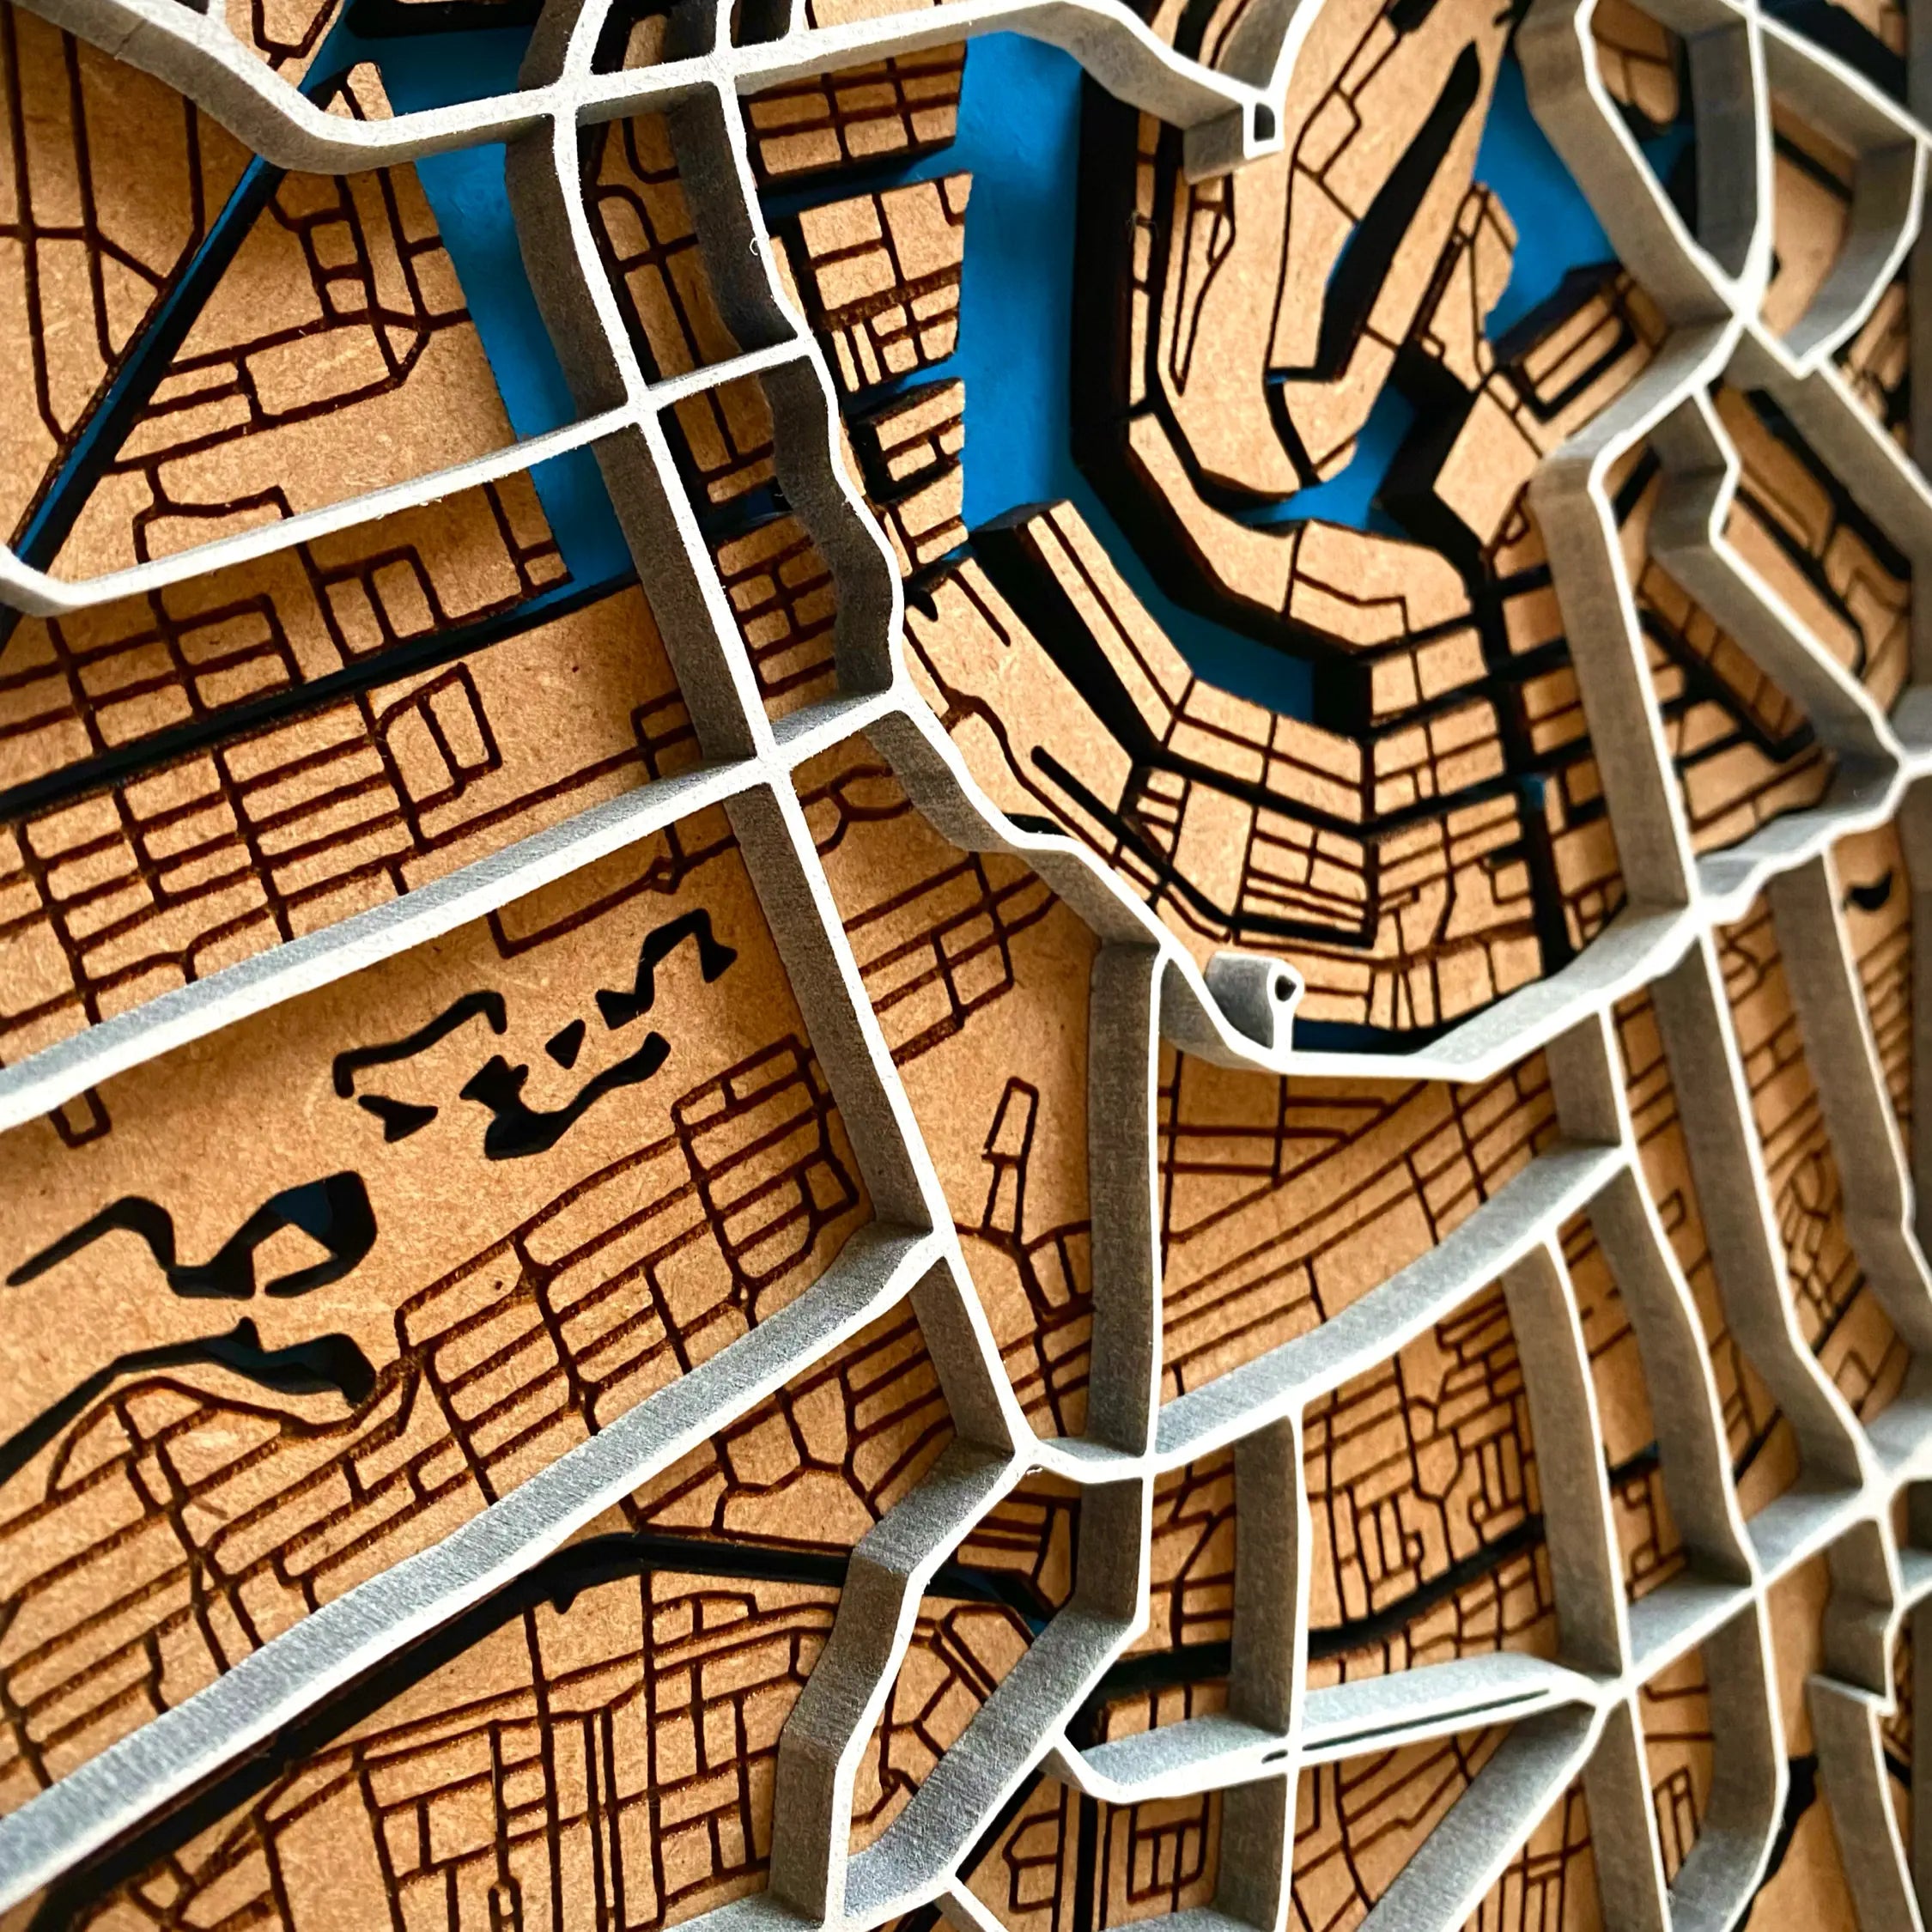 A close up of a vertical wooden map made using thick 6mm MDF of Amsterdam. The map is a 3D interpretation of Amsterdam city centre with elevated main roads and local streets, and painted blue rivers underneath